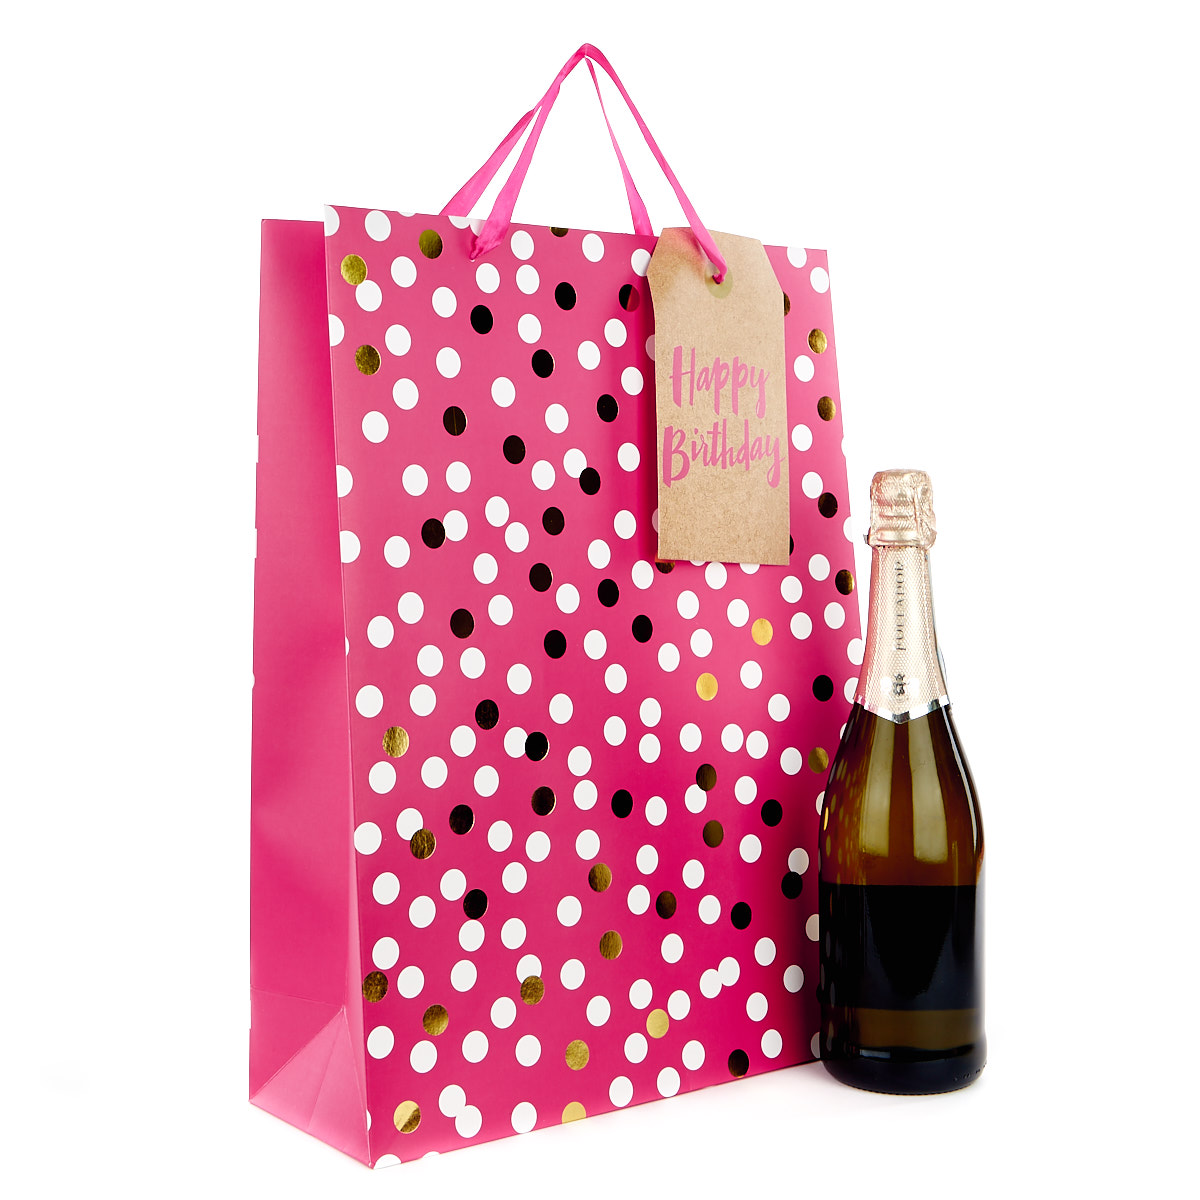 Extra Large Portrait Gift Bag - Pink Spots, Happy Birthday